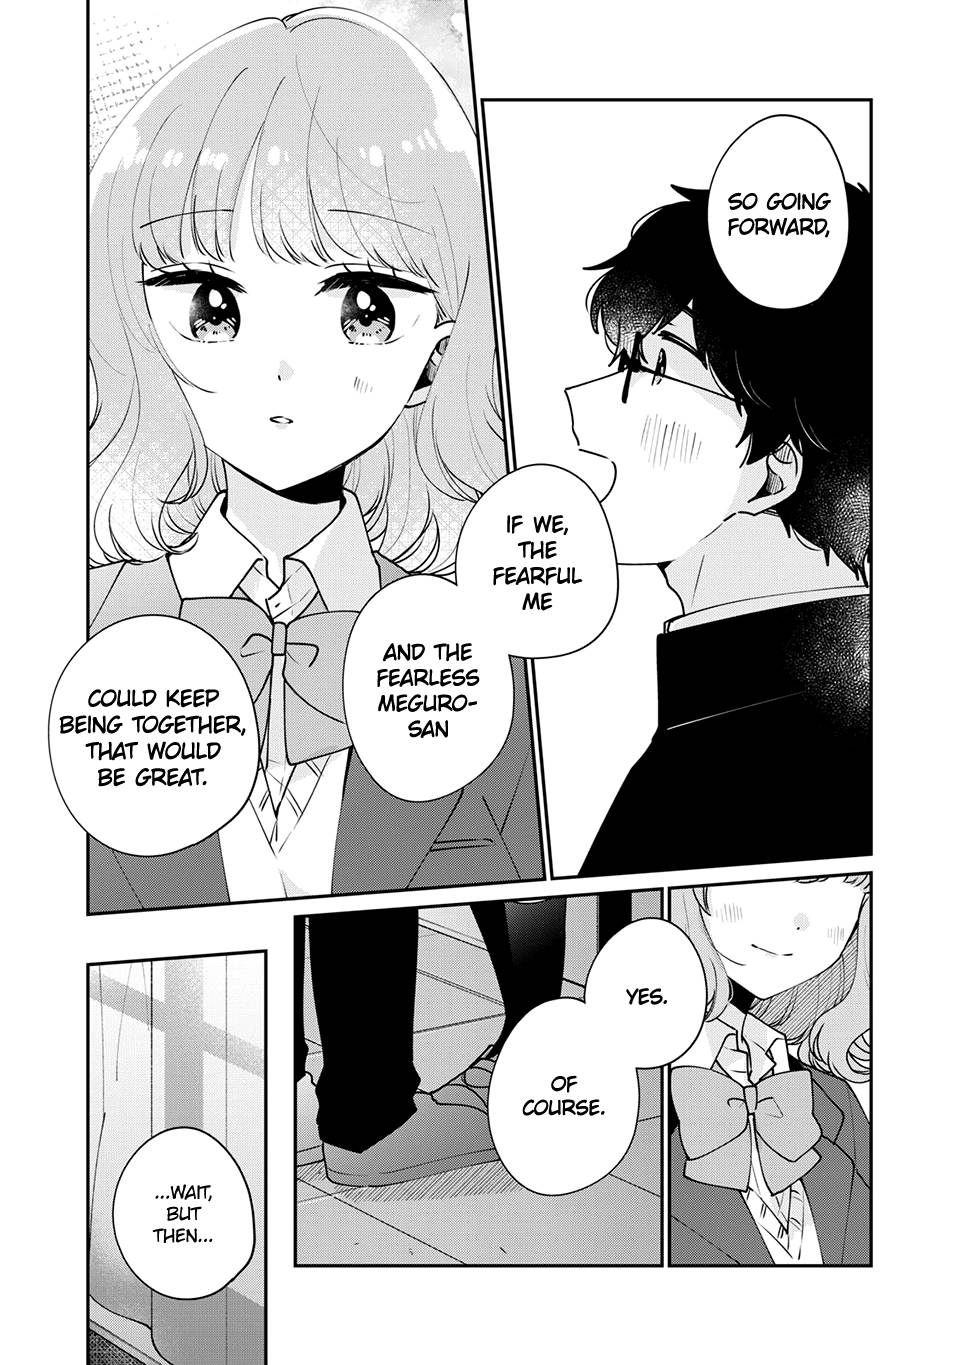 It's Not Meguro-san's First Time chapter 46 page 12